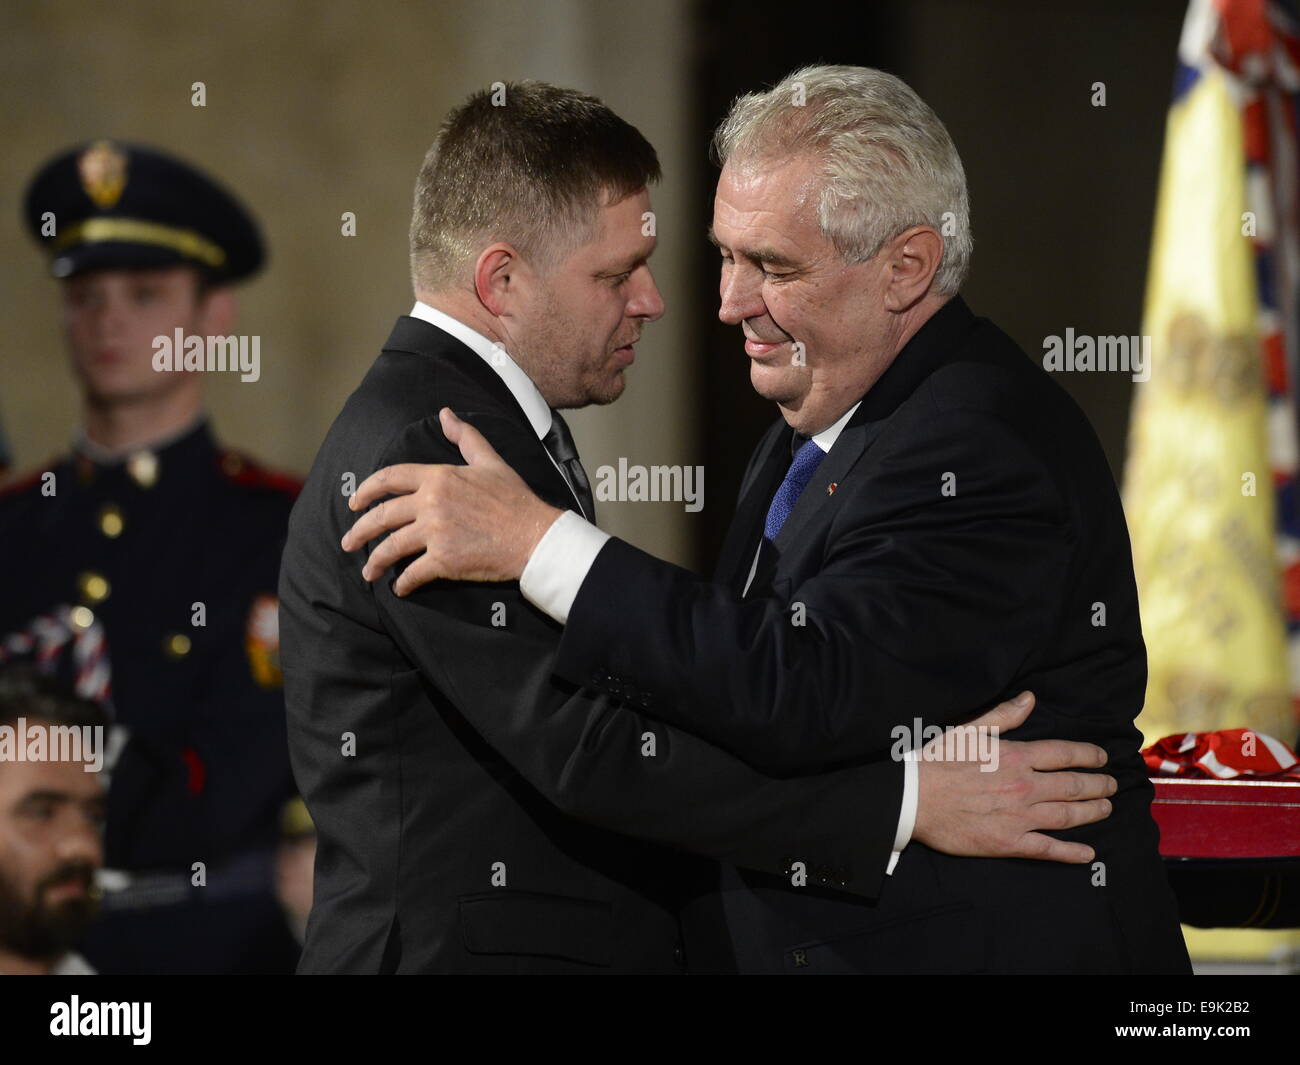 Prague, Czech Republic. 28th Oct, 2014. Czech President Milos Zeman (right) bestowed the Order of the White Lion, the highest Czech state award, on Slovak Prime Minister Robert Fico at a ceremony at Prague Castle today, on Tuesday, October 28, 2014. Fico have been decorated for their outstanding contribution for the benefit of the Czech Republic. Credit:  CTK/Alamy Live News Stock Photo